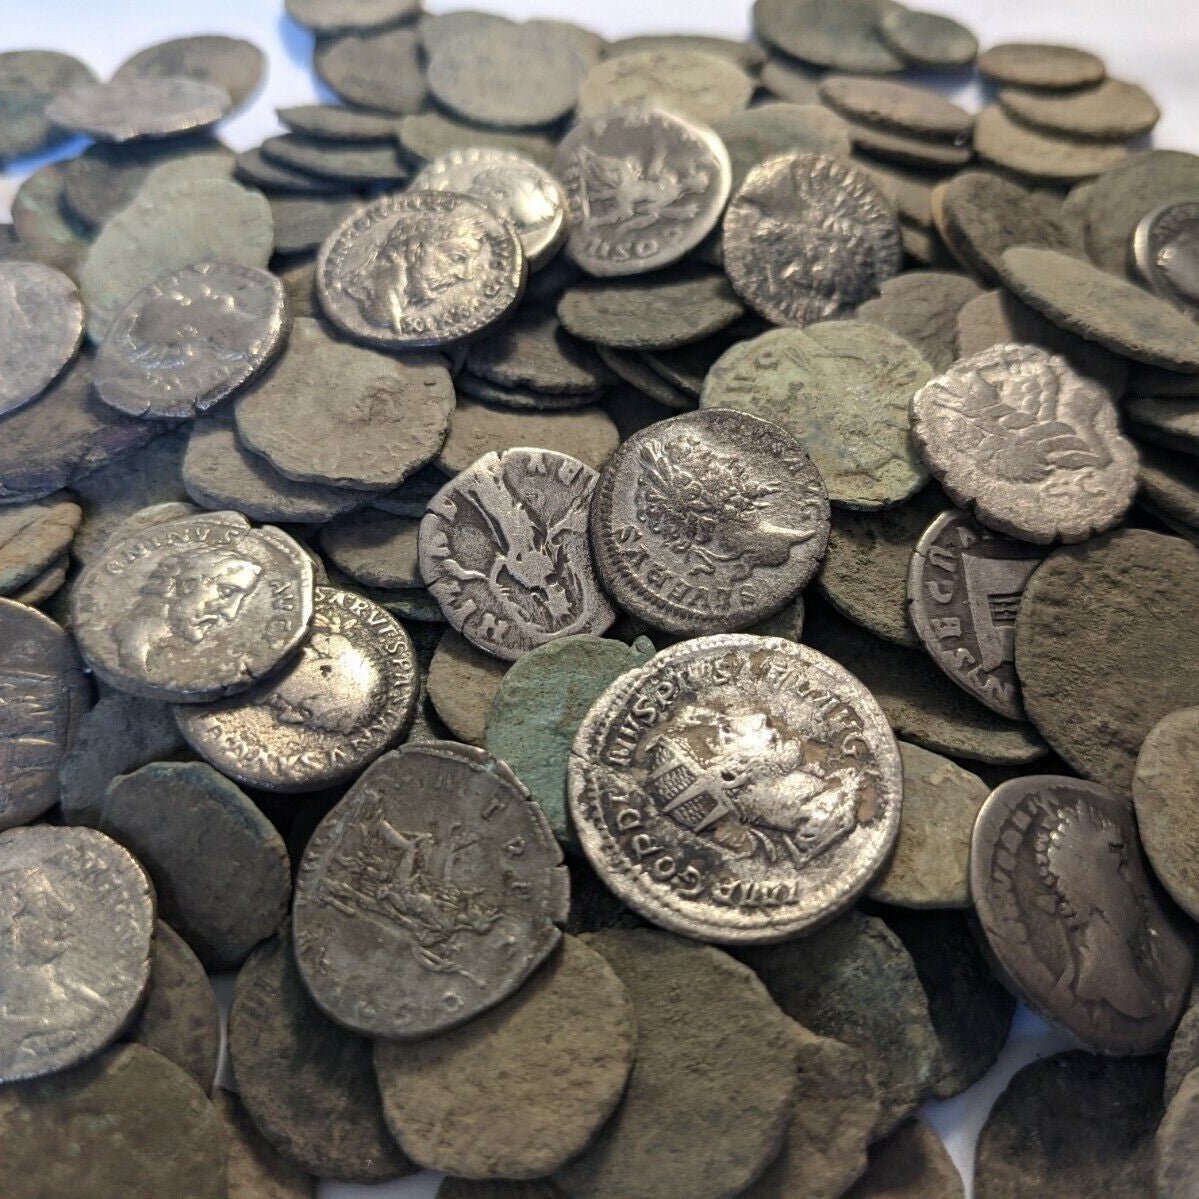 High Quality uncleaned Ancient Roman coins. Silver coins Included! 1600+ Years Old - Premium Ancient Coins - Lot